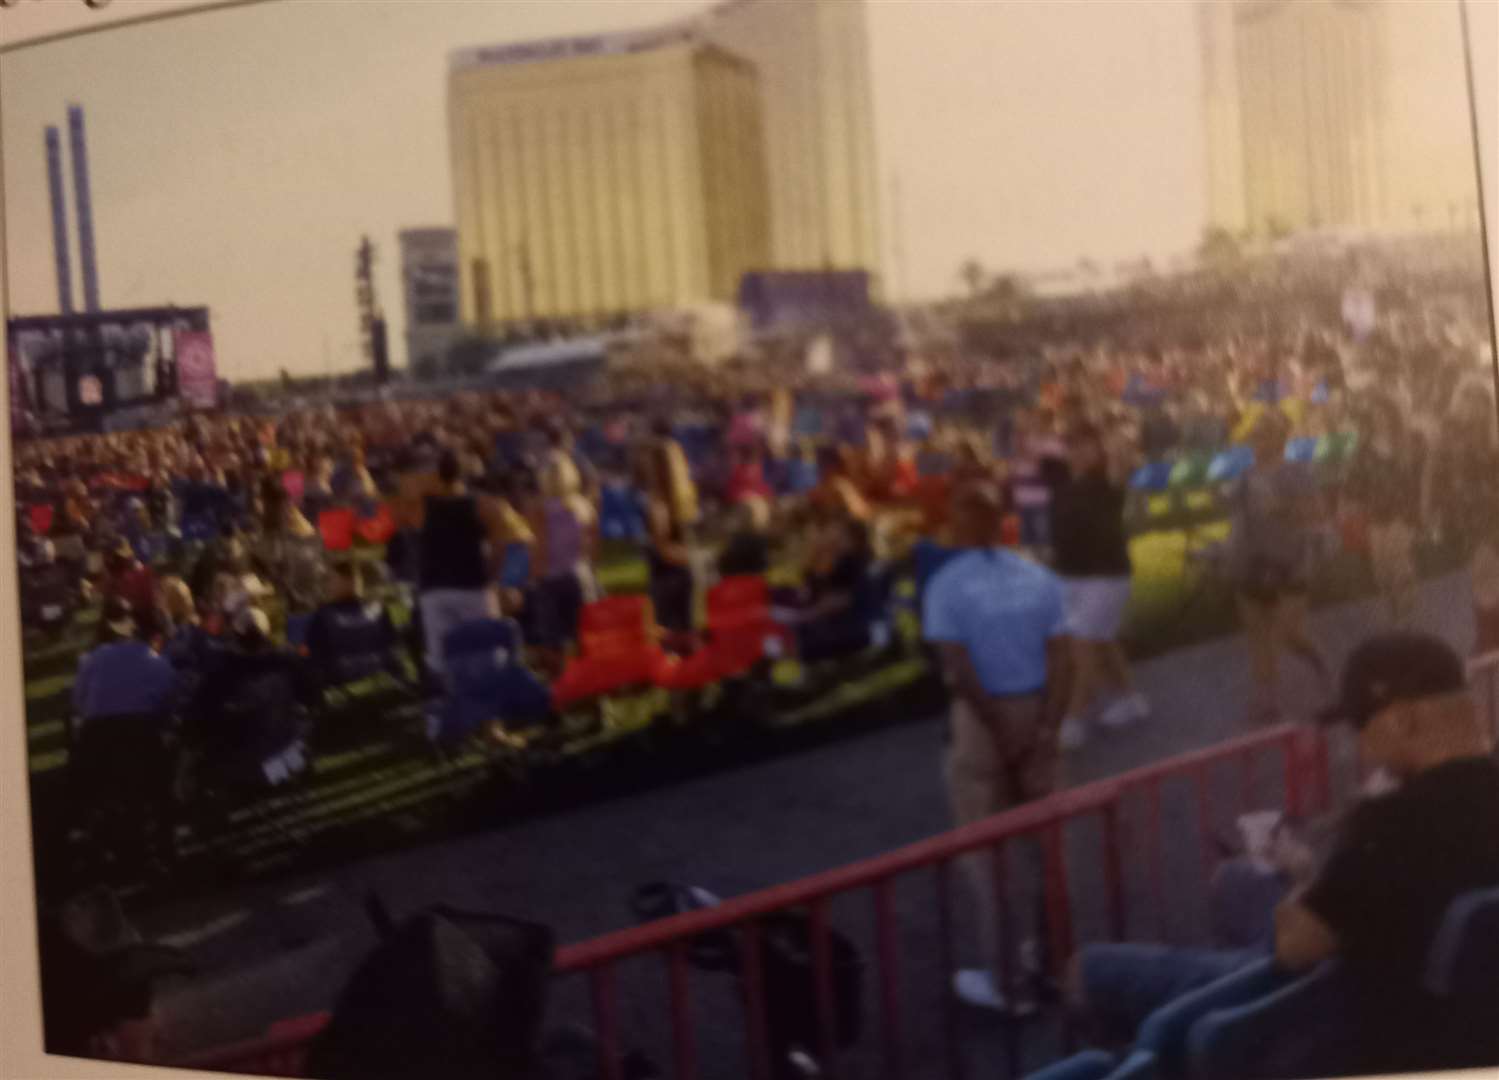 A picture showing the music festival in Las Vegas and at the back the hotel from where the shooter killed 58 people and injured over 600.